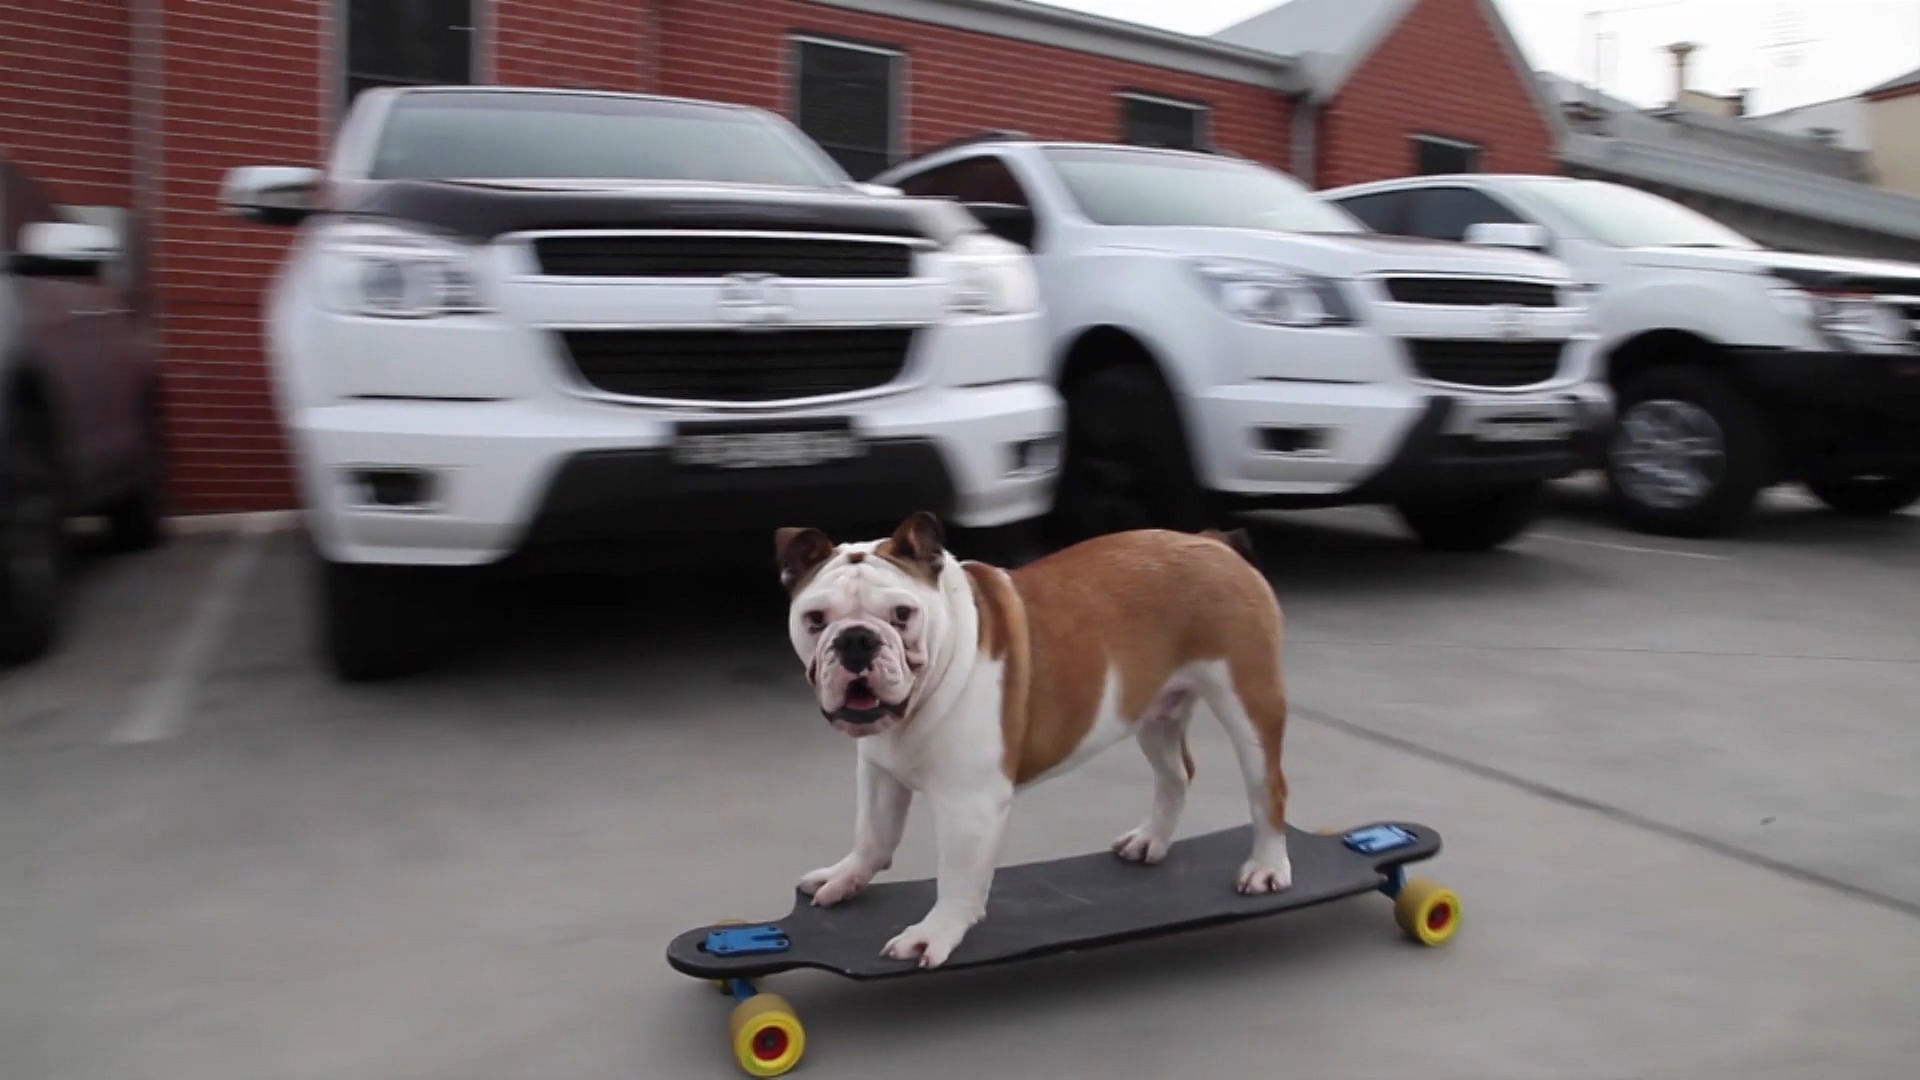 Pommy hijacked the skateboard of his owner’s daughter. (Photo: AP/Caters News Screengrab)